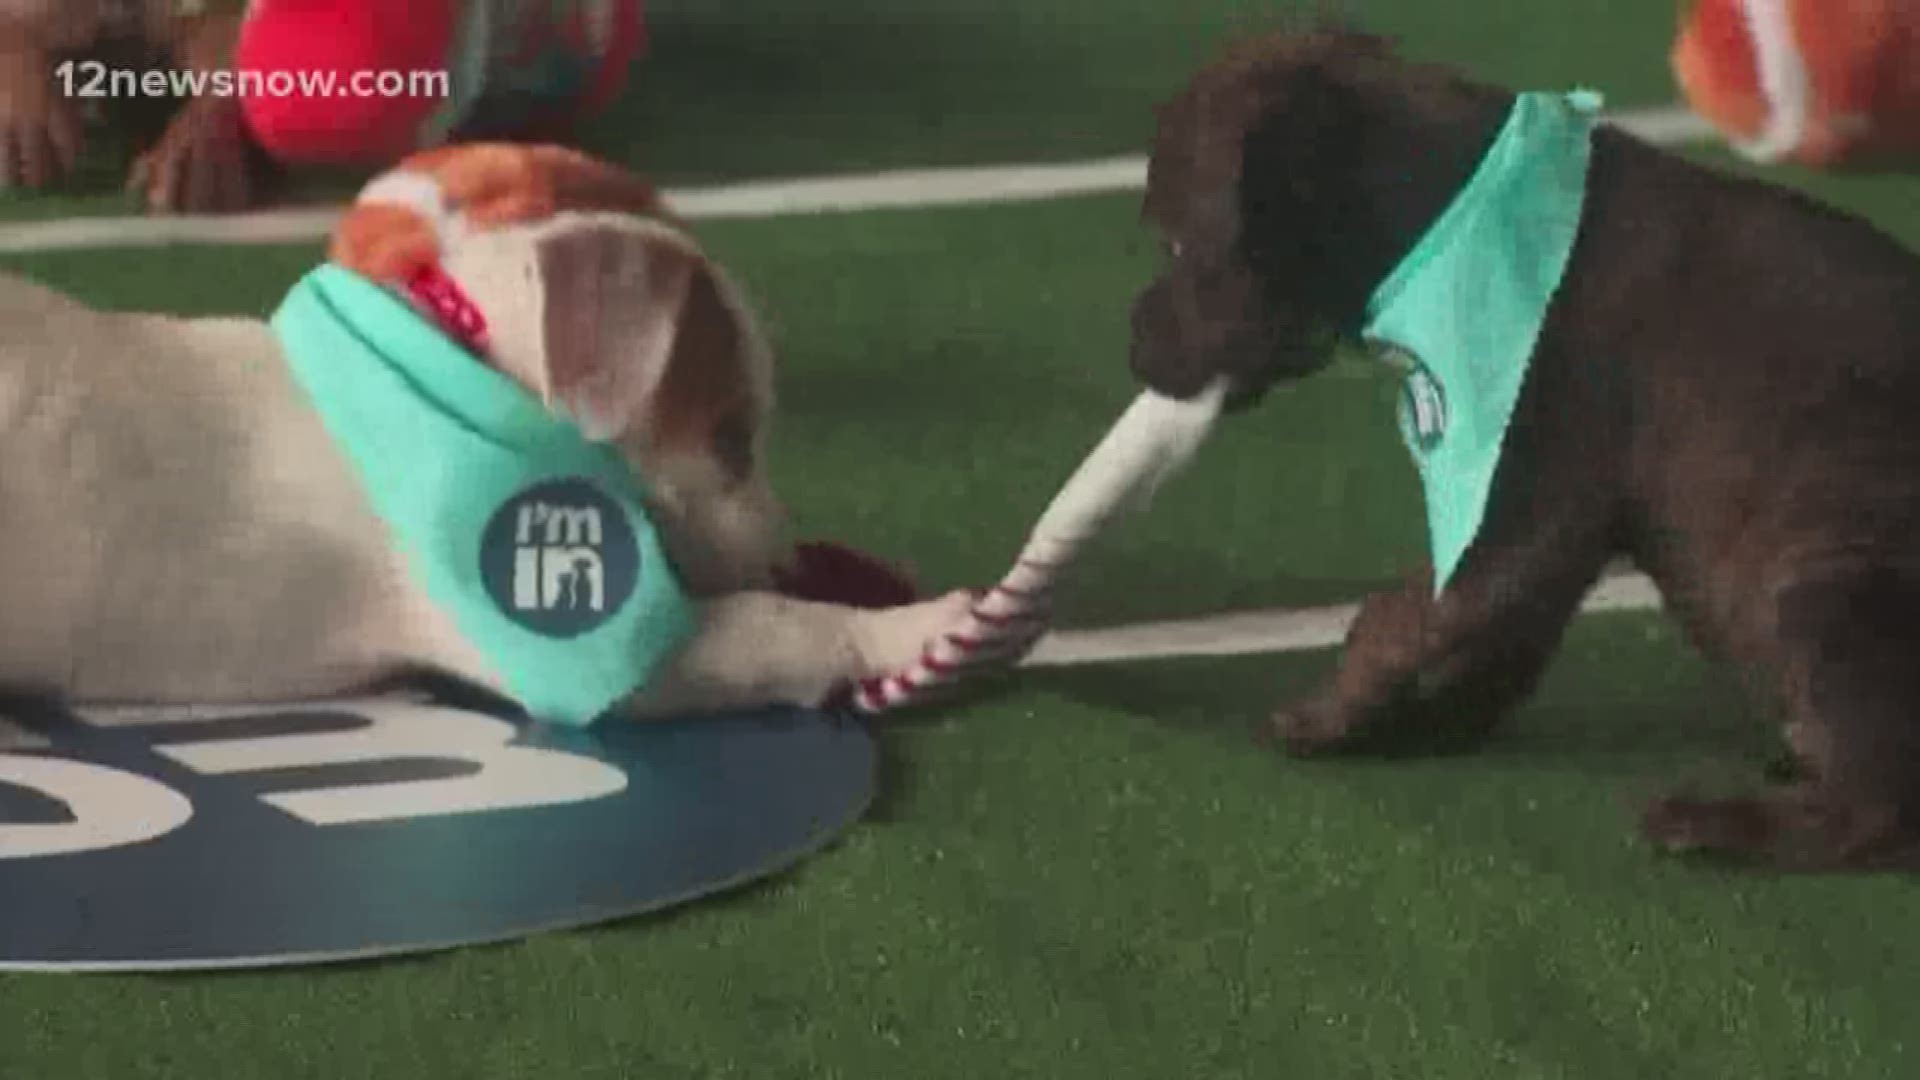 Puppies playing in their edition of the "Super Bowl"  to raise awareness and funding for animals looking for homes.